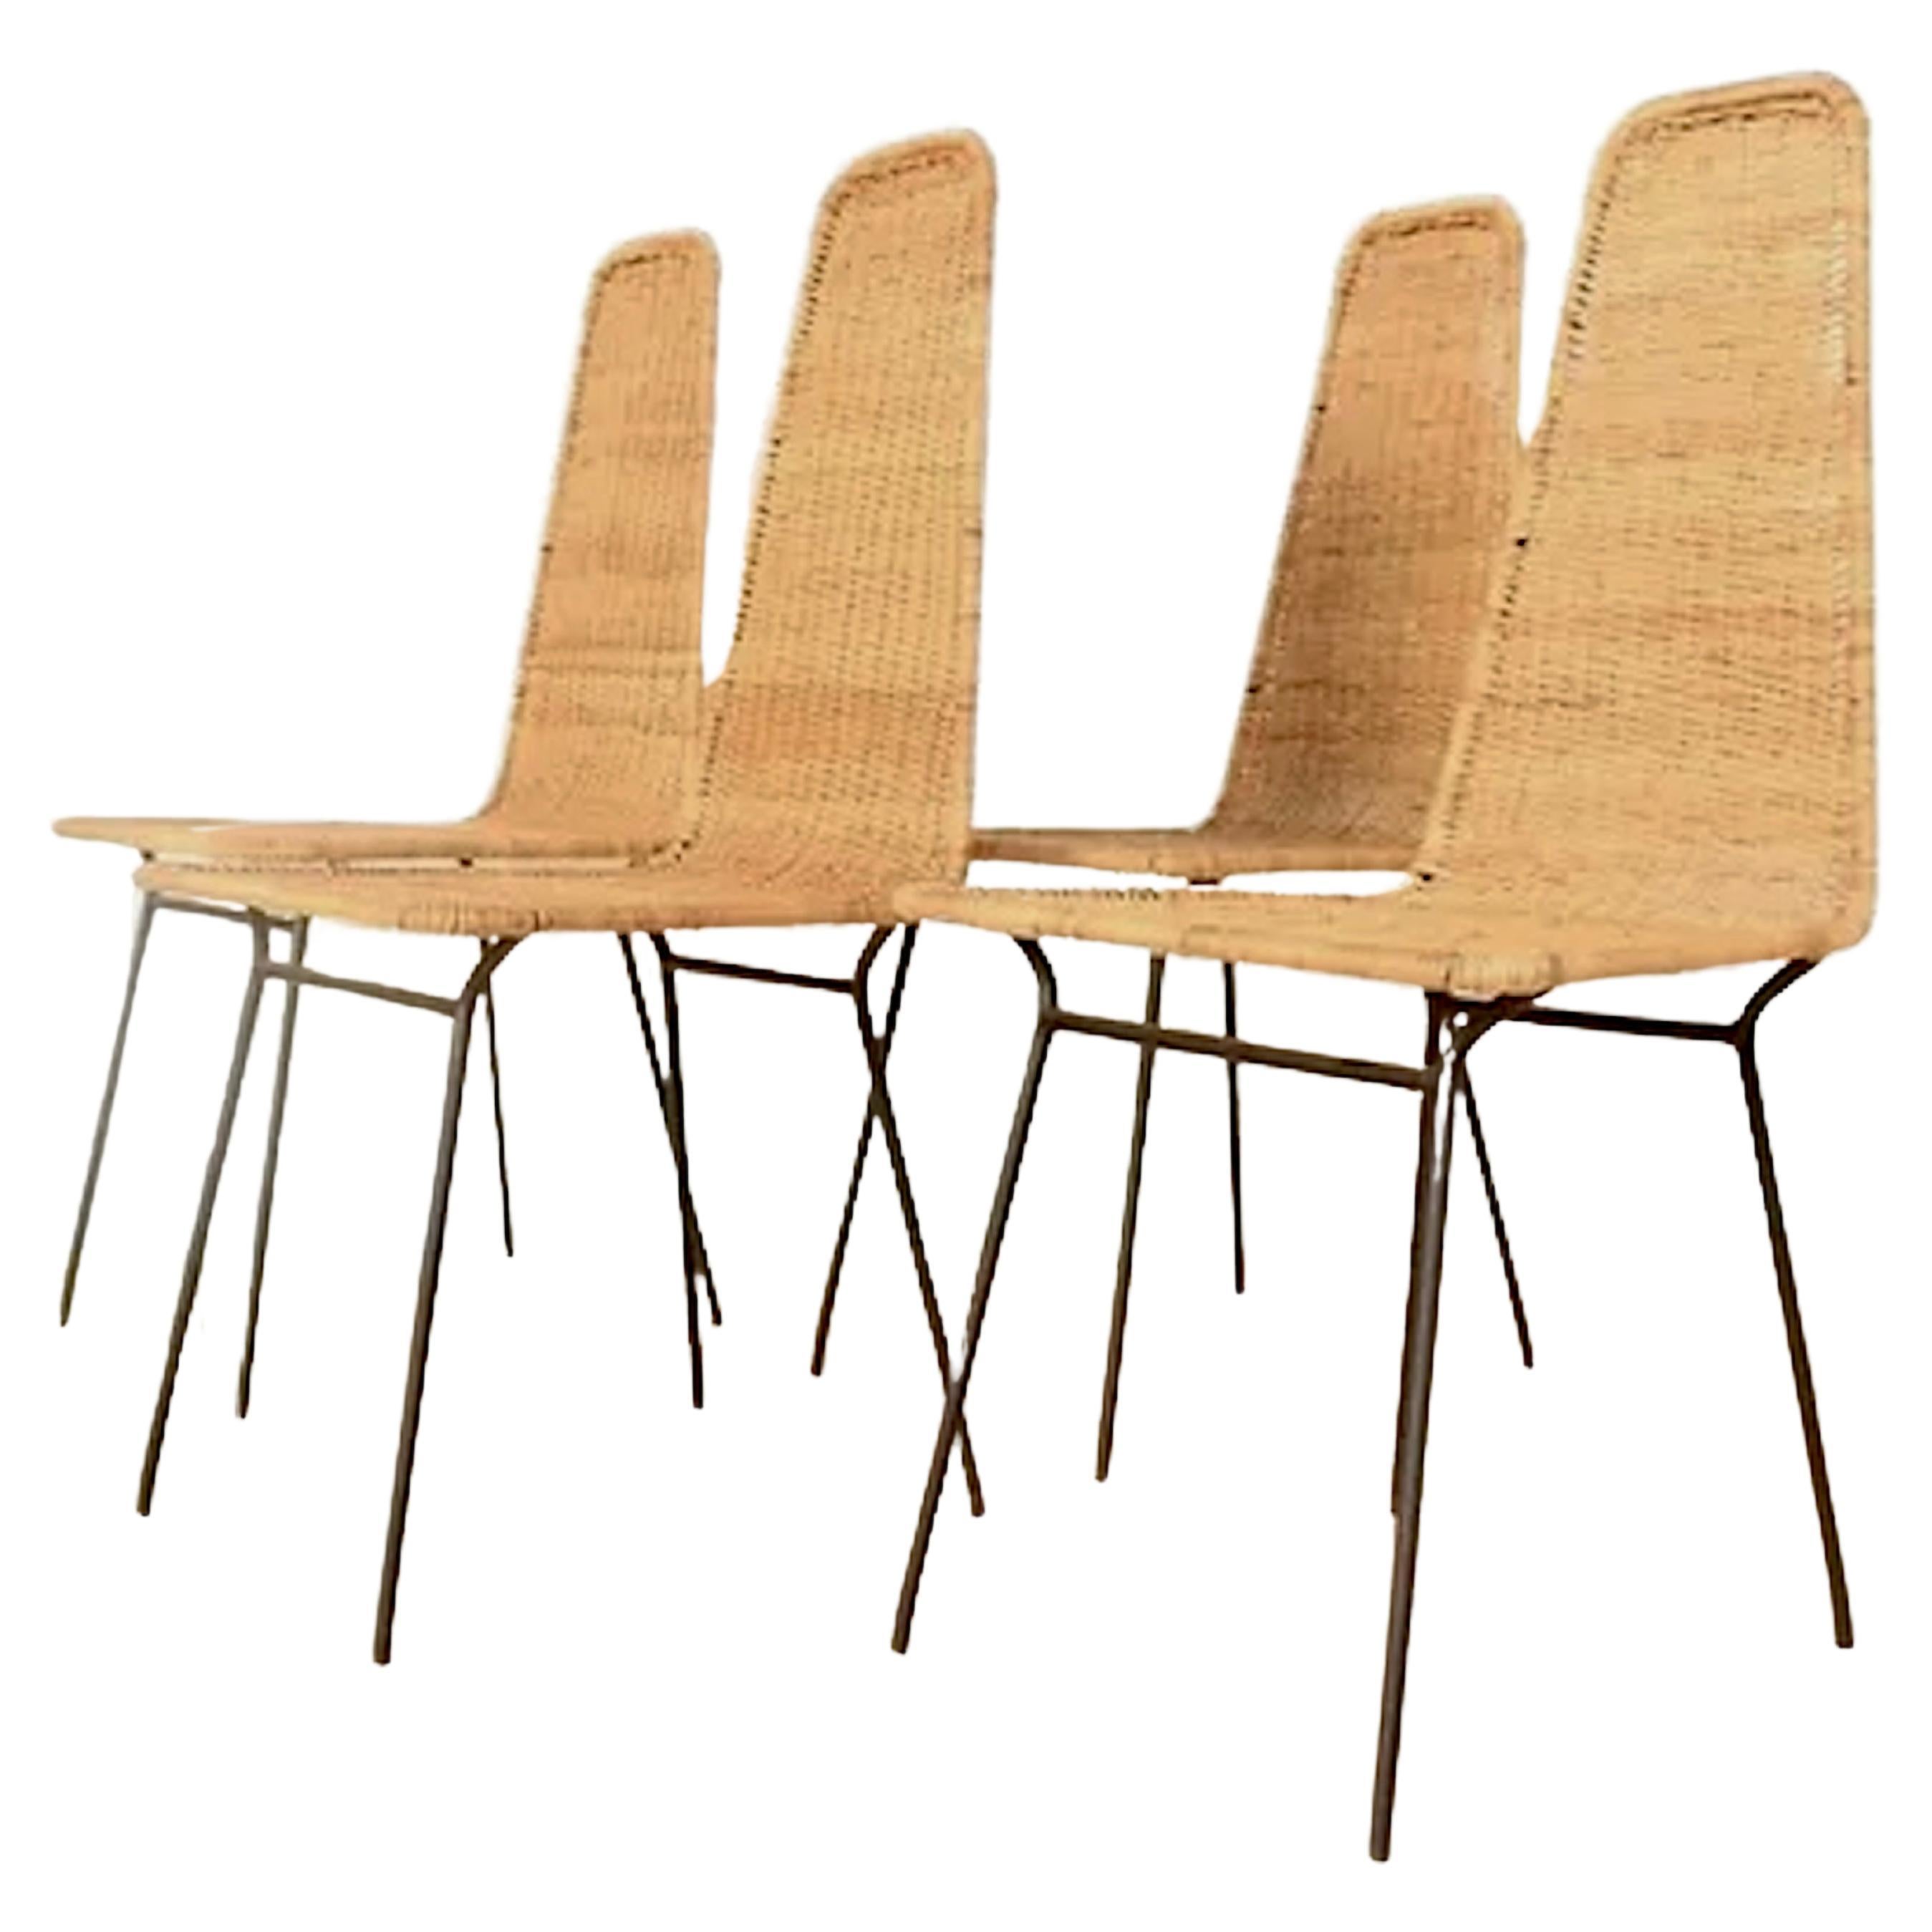 Carlo Hauner. Suite of 4 Rattan chairs, c. 1950. Metal and rattan For Sale